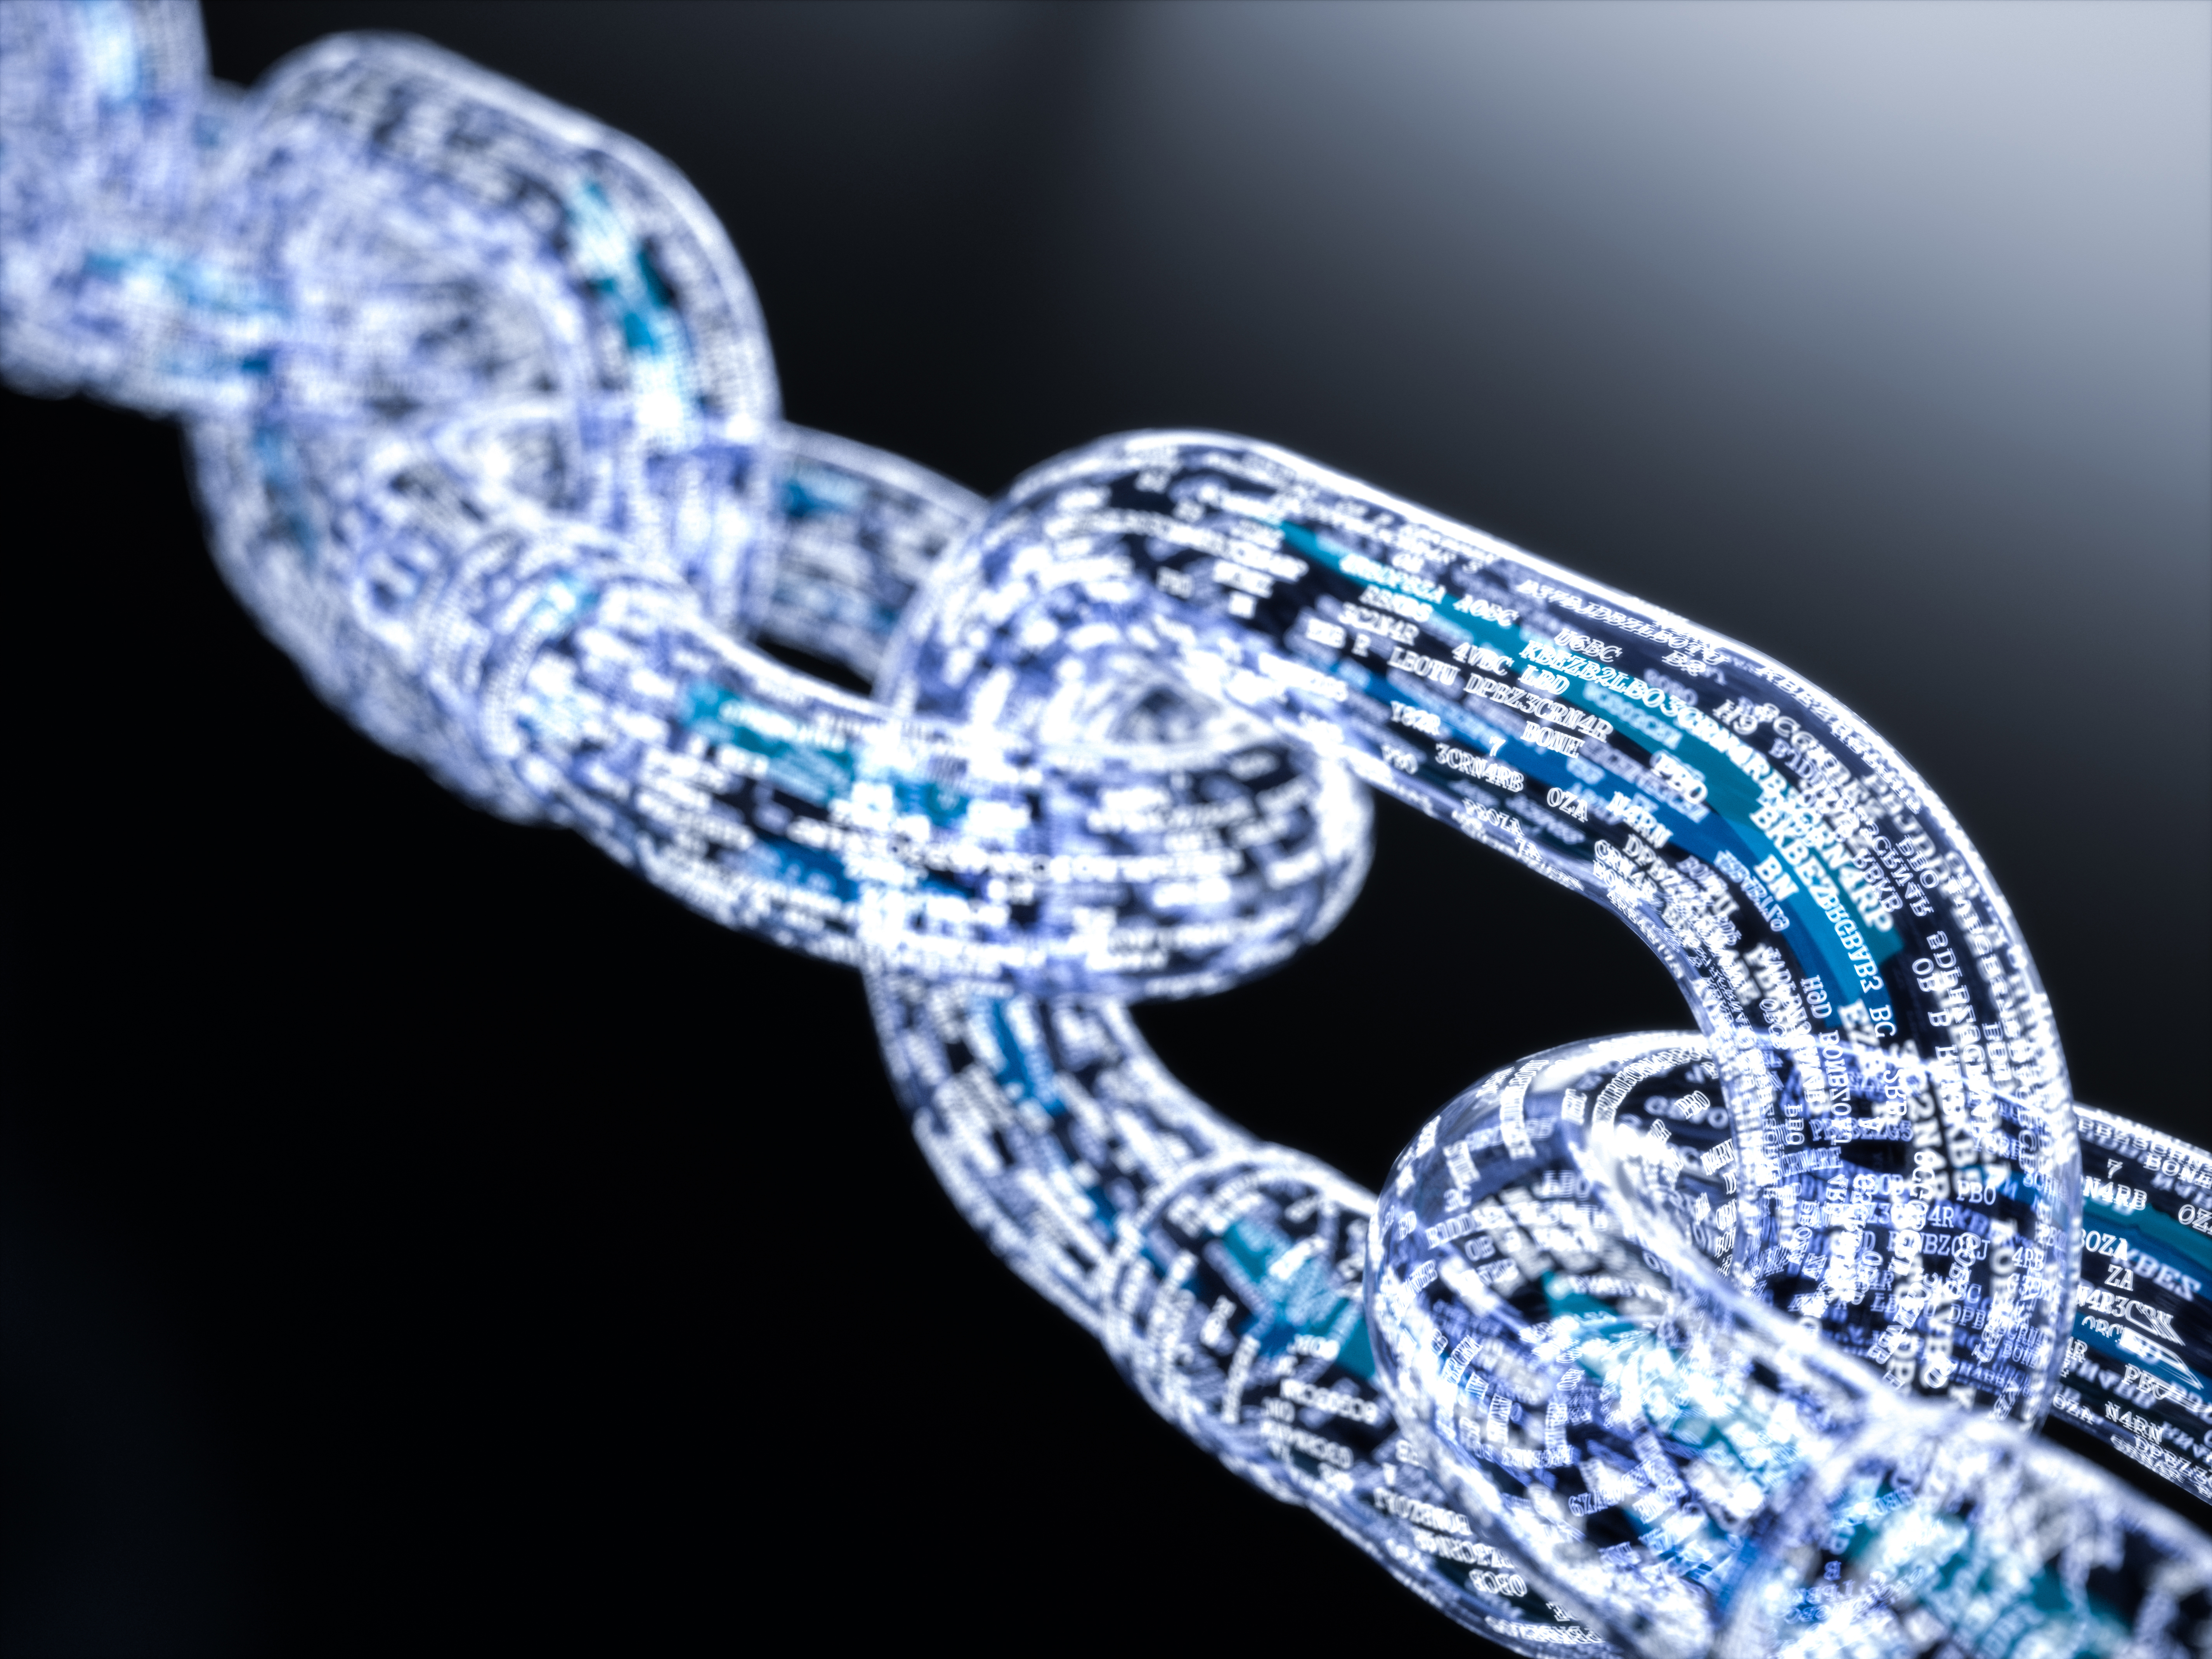 7 Uses for Blockchain for Businesses | Business News Daily